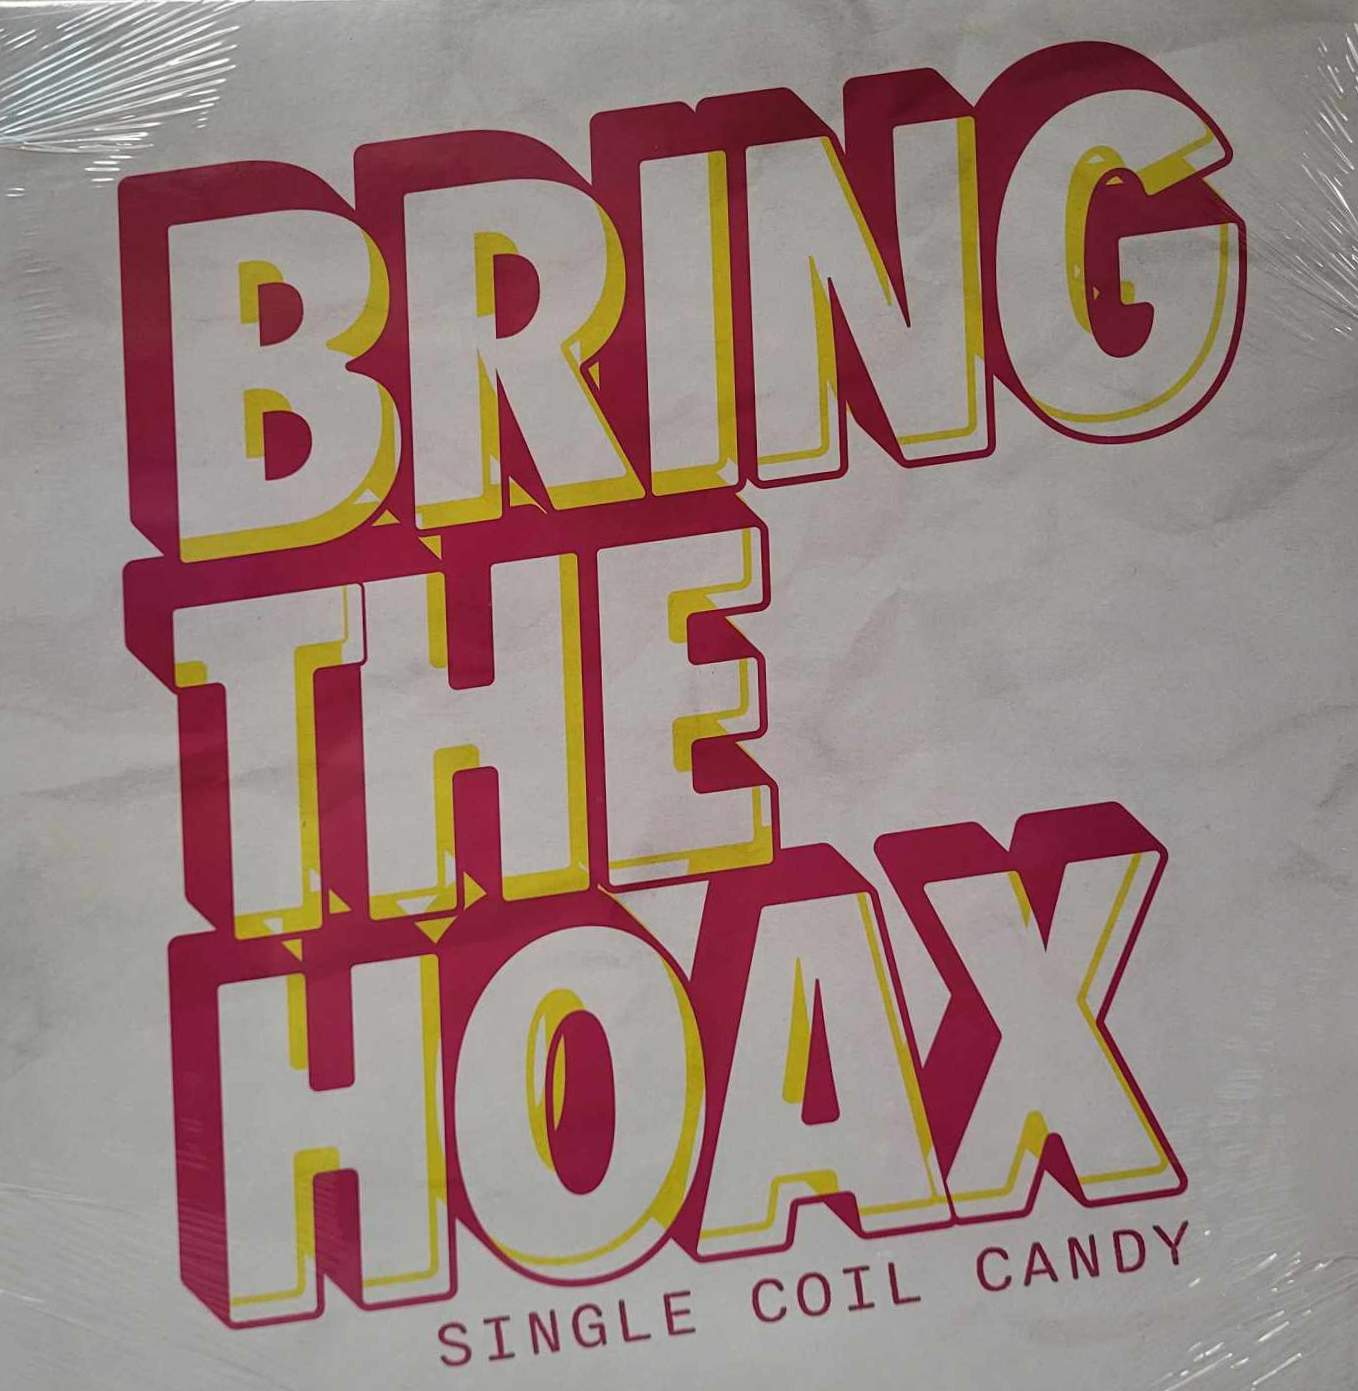 BRING THE HOAX - SINGLE COIL CANDY